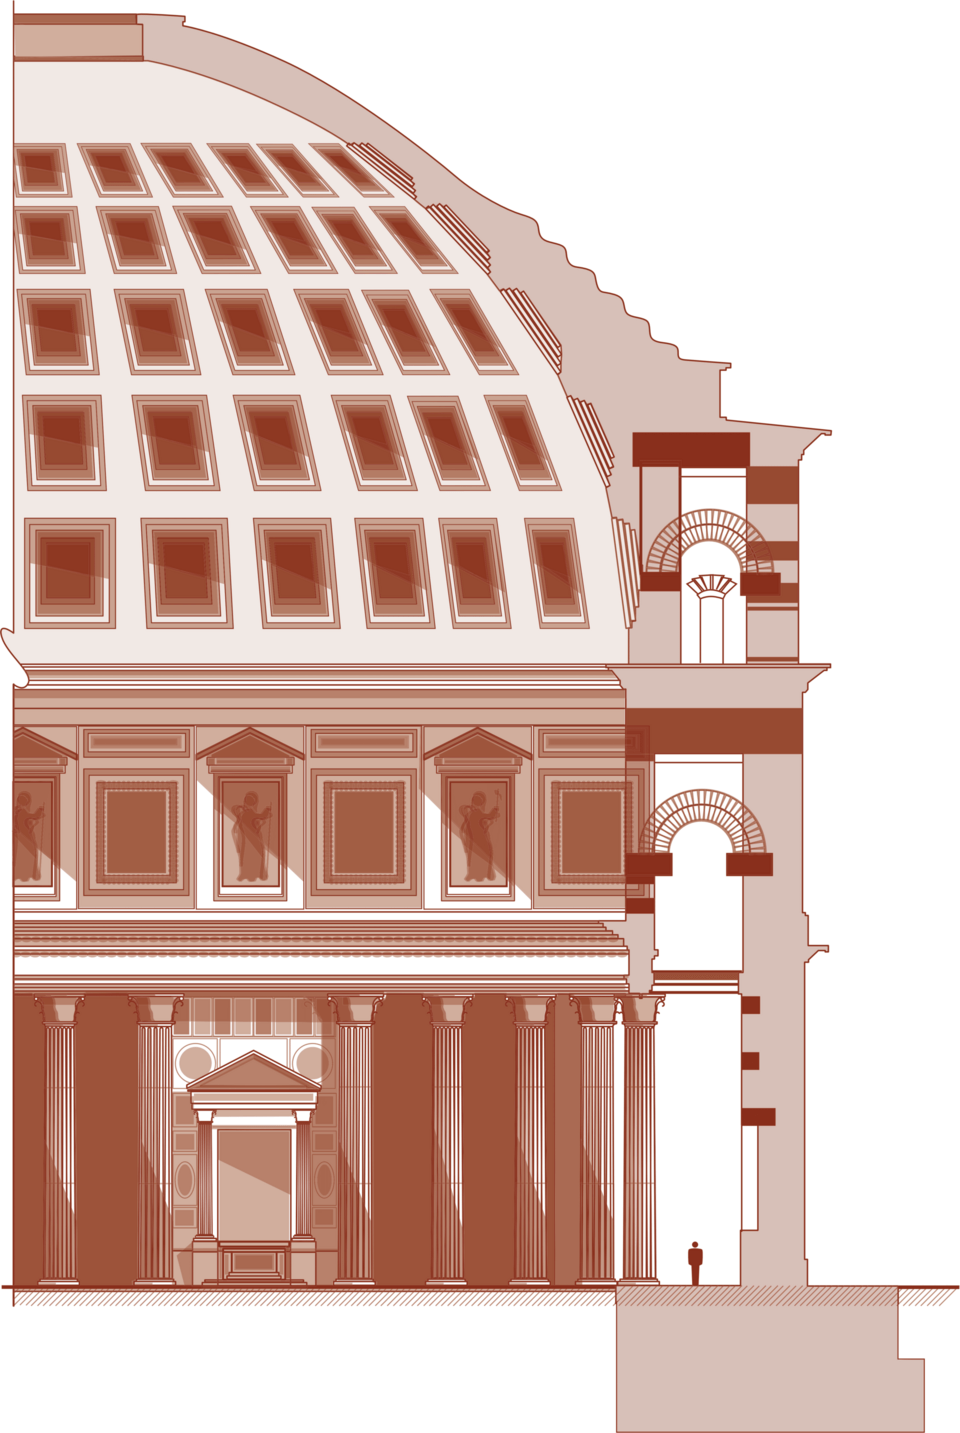 Illustrated Cross-Section Conveys True Scale of the Pantheon.